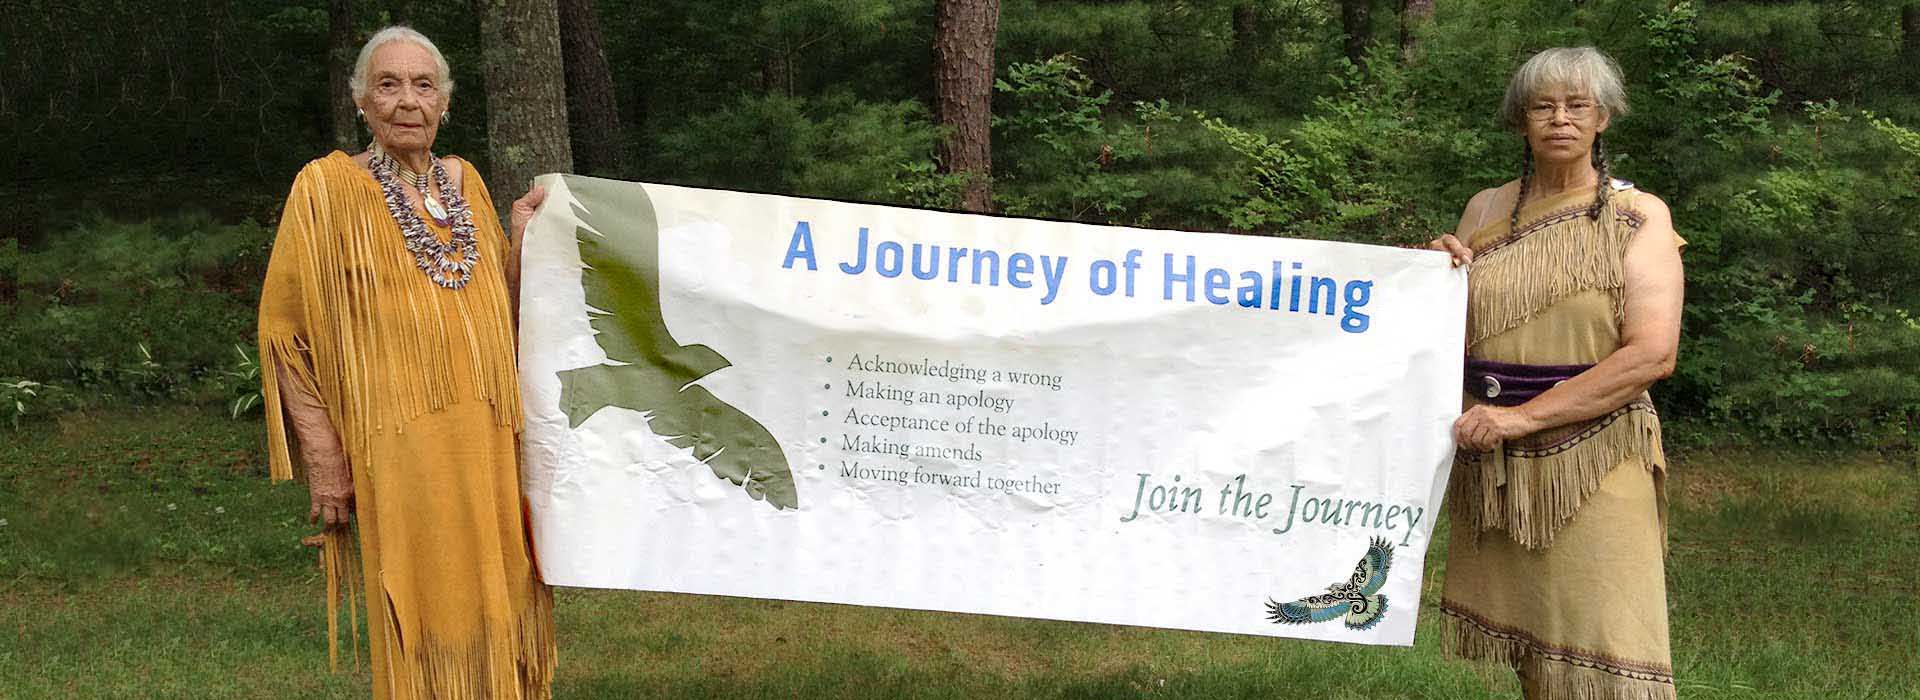 Clan Mothers holding Journey of Healing banner